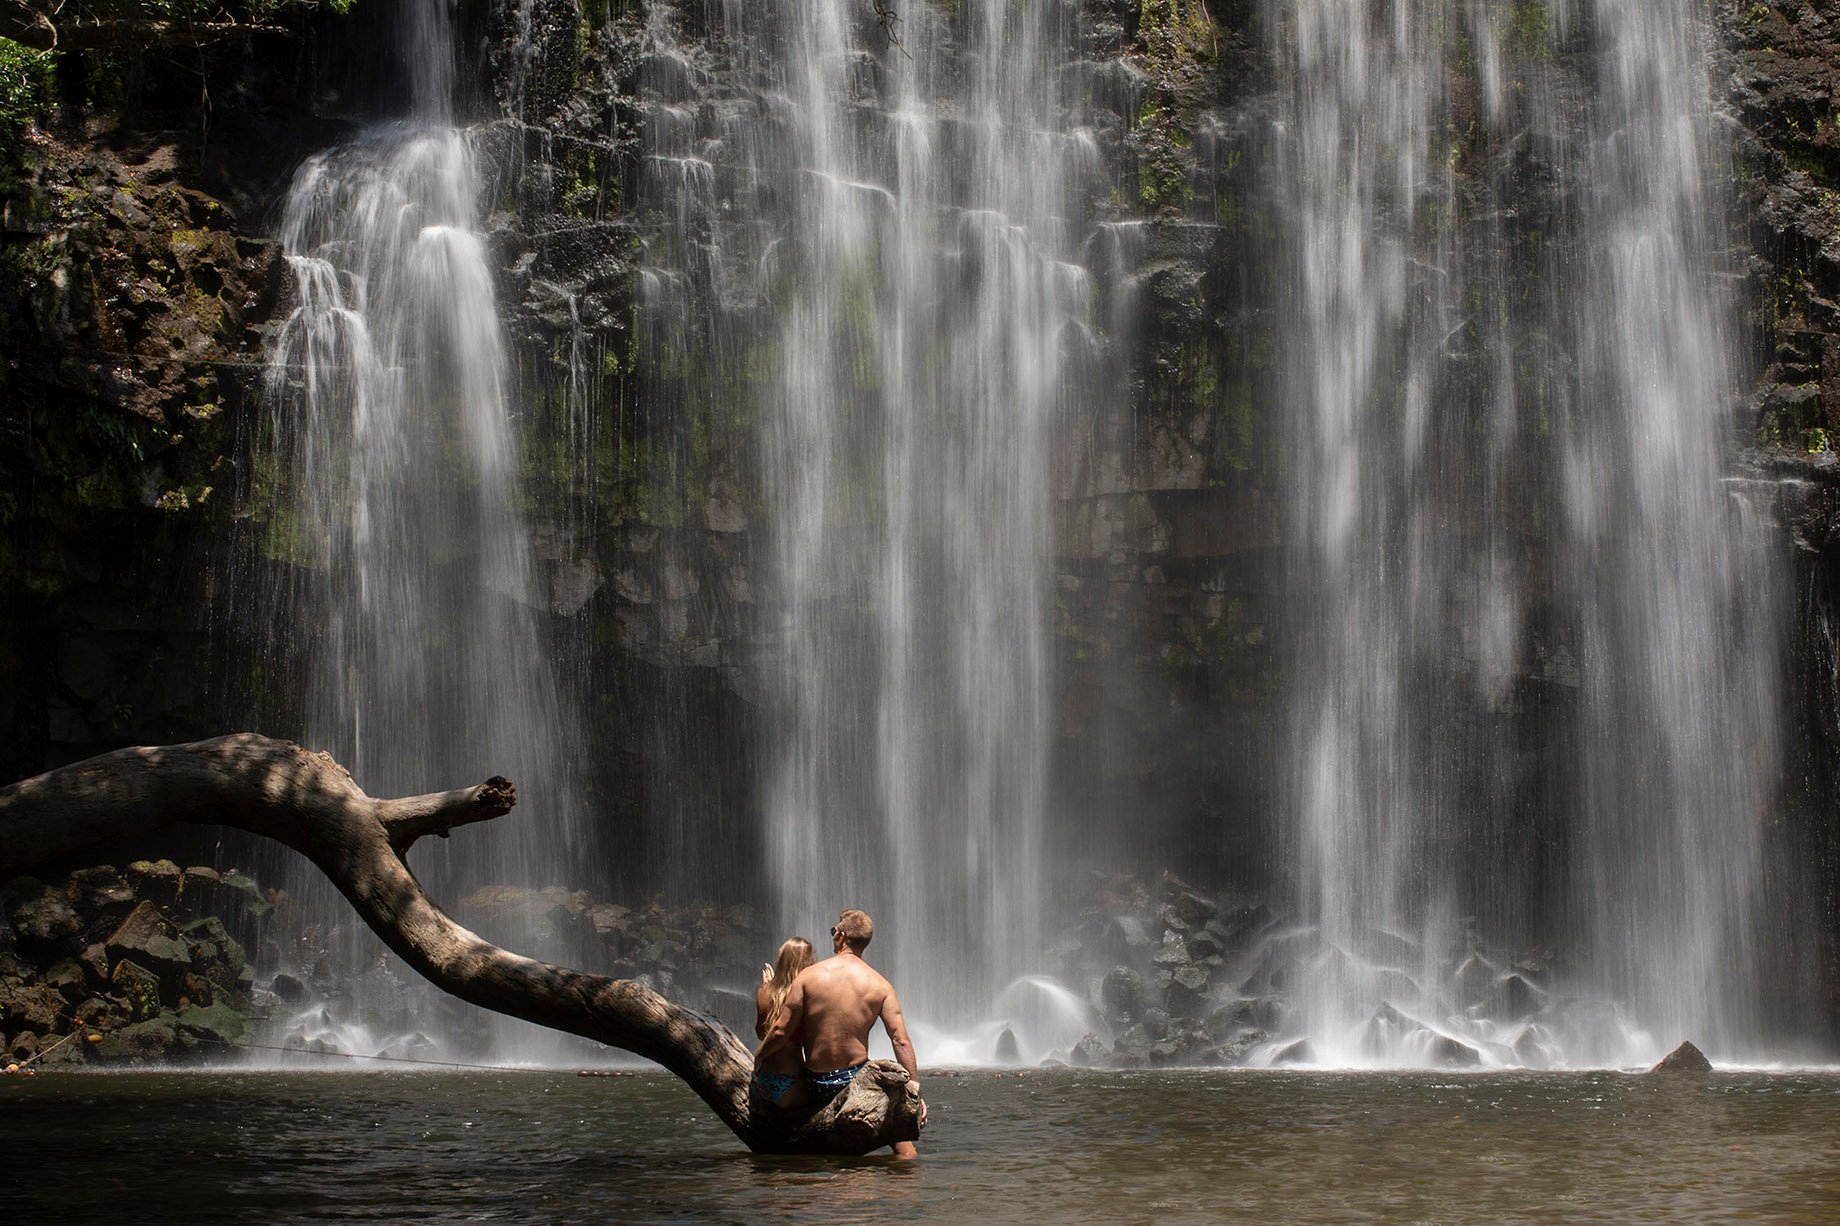 Two people sit underneath a waterfall in Costa Rican national park shot by Cristina Candel for Viajar 